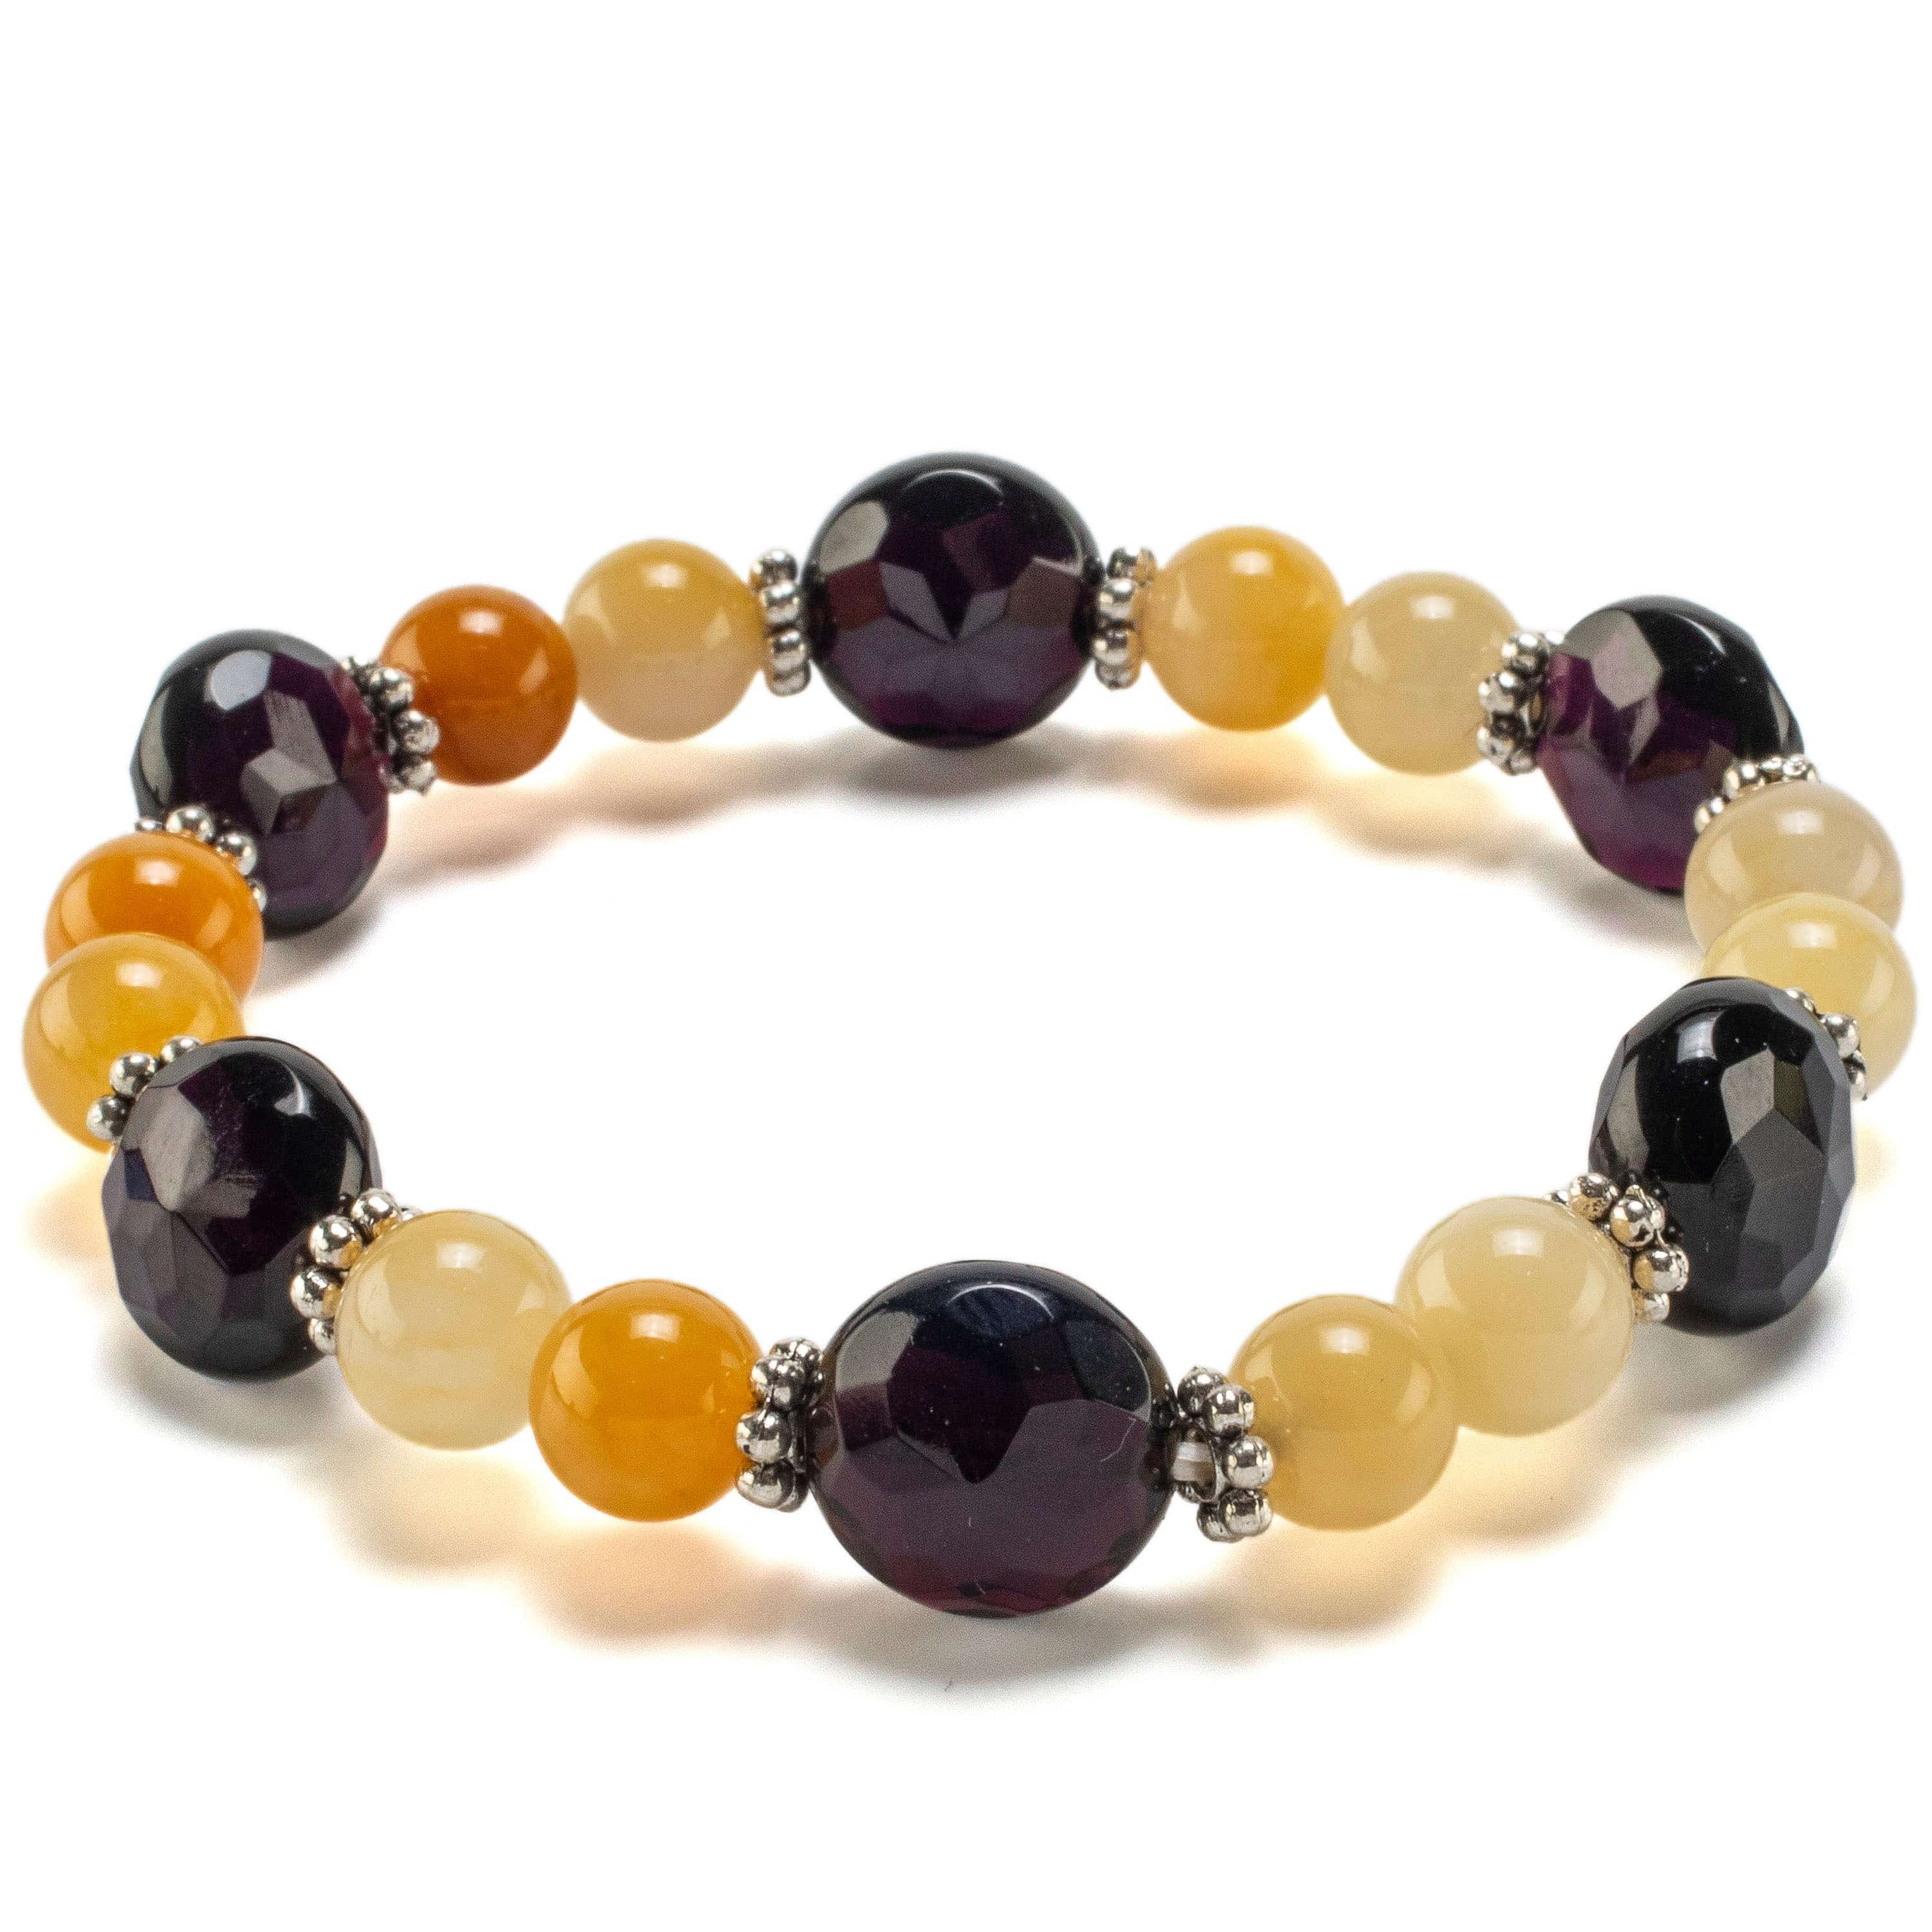 Kalifano Gemstone Bracelets Round Butter Jade and Faceted Flat Circle Black Agate with Accent Beads Gemstone Elastic Bracelet BLUE-BGP-040